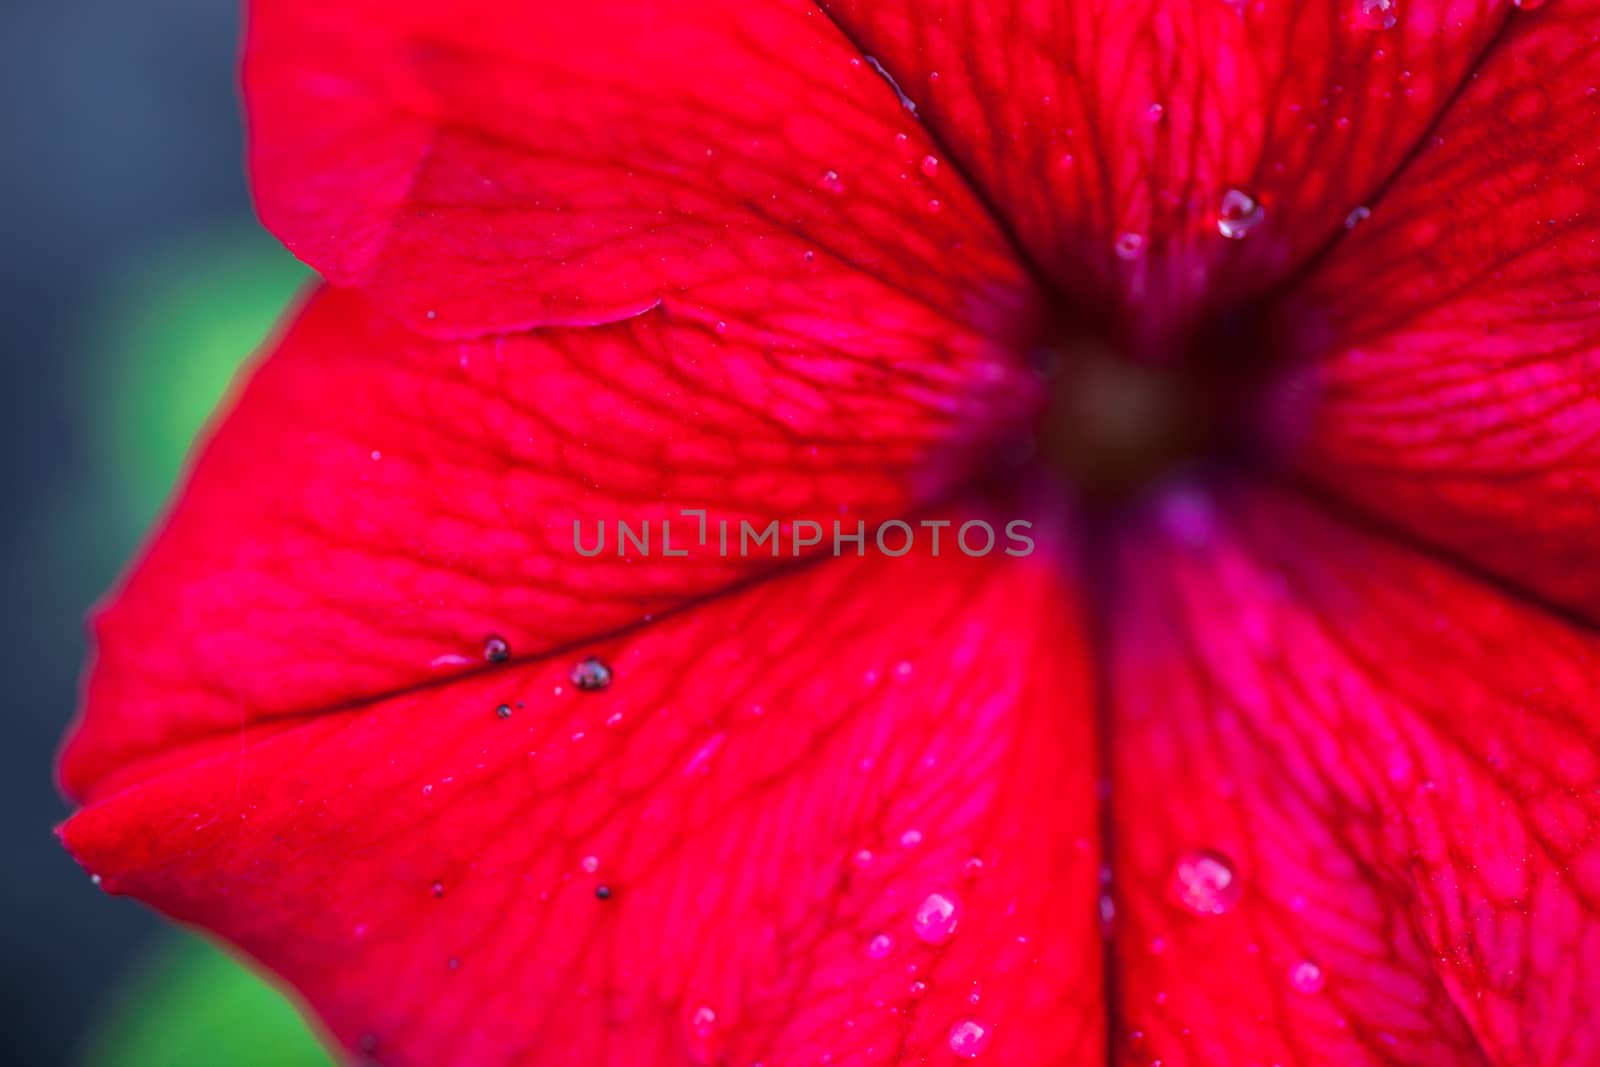 Closeup of the bright red Petunia flower with drops of dew.